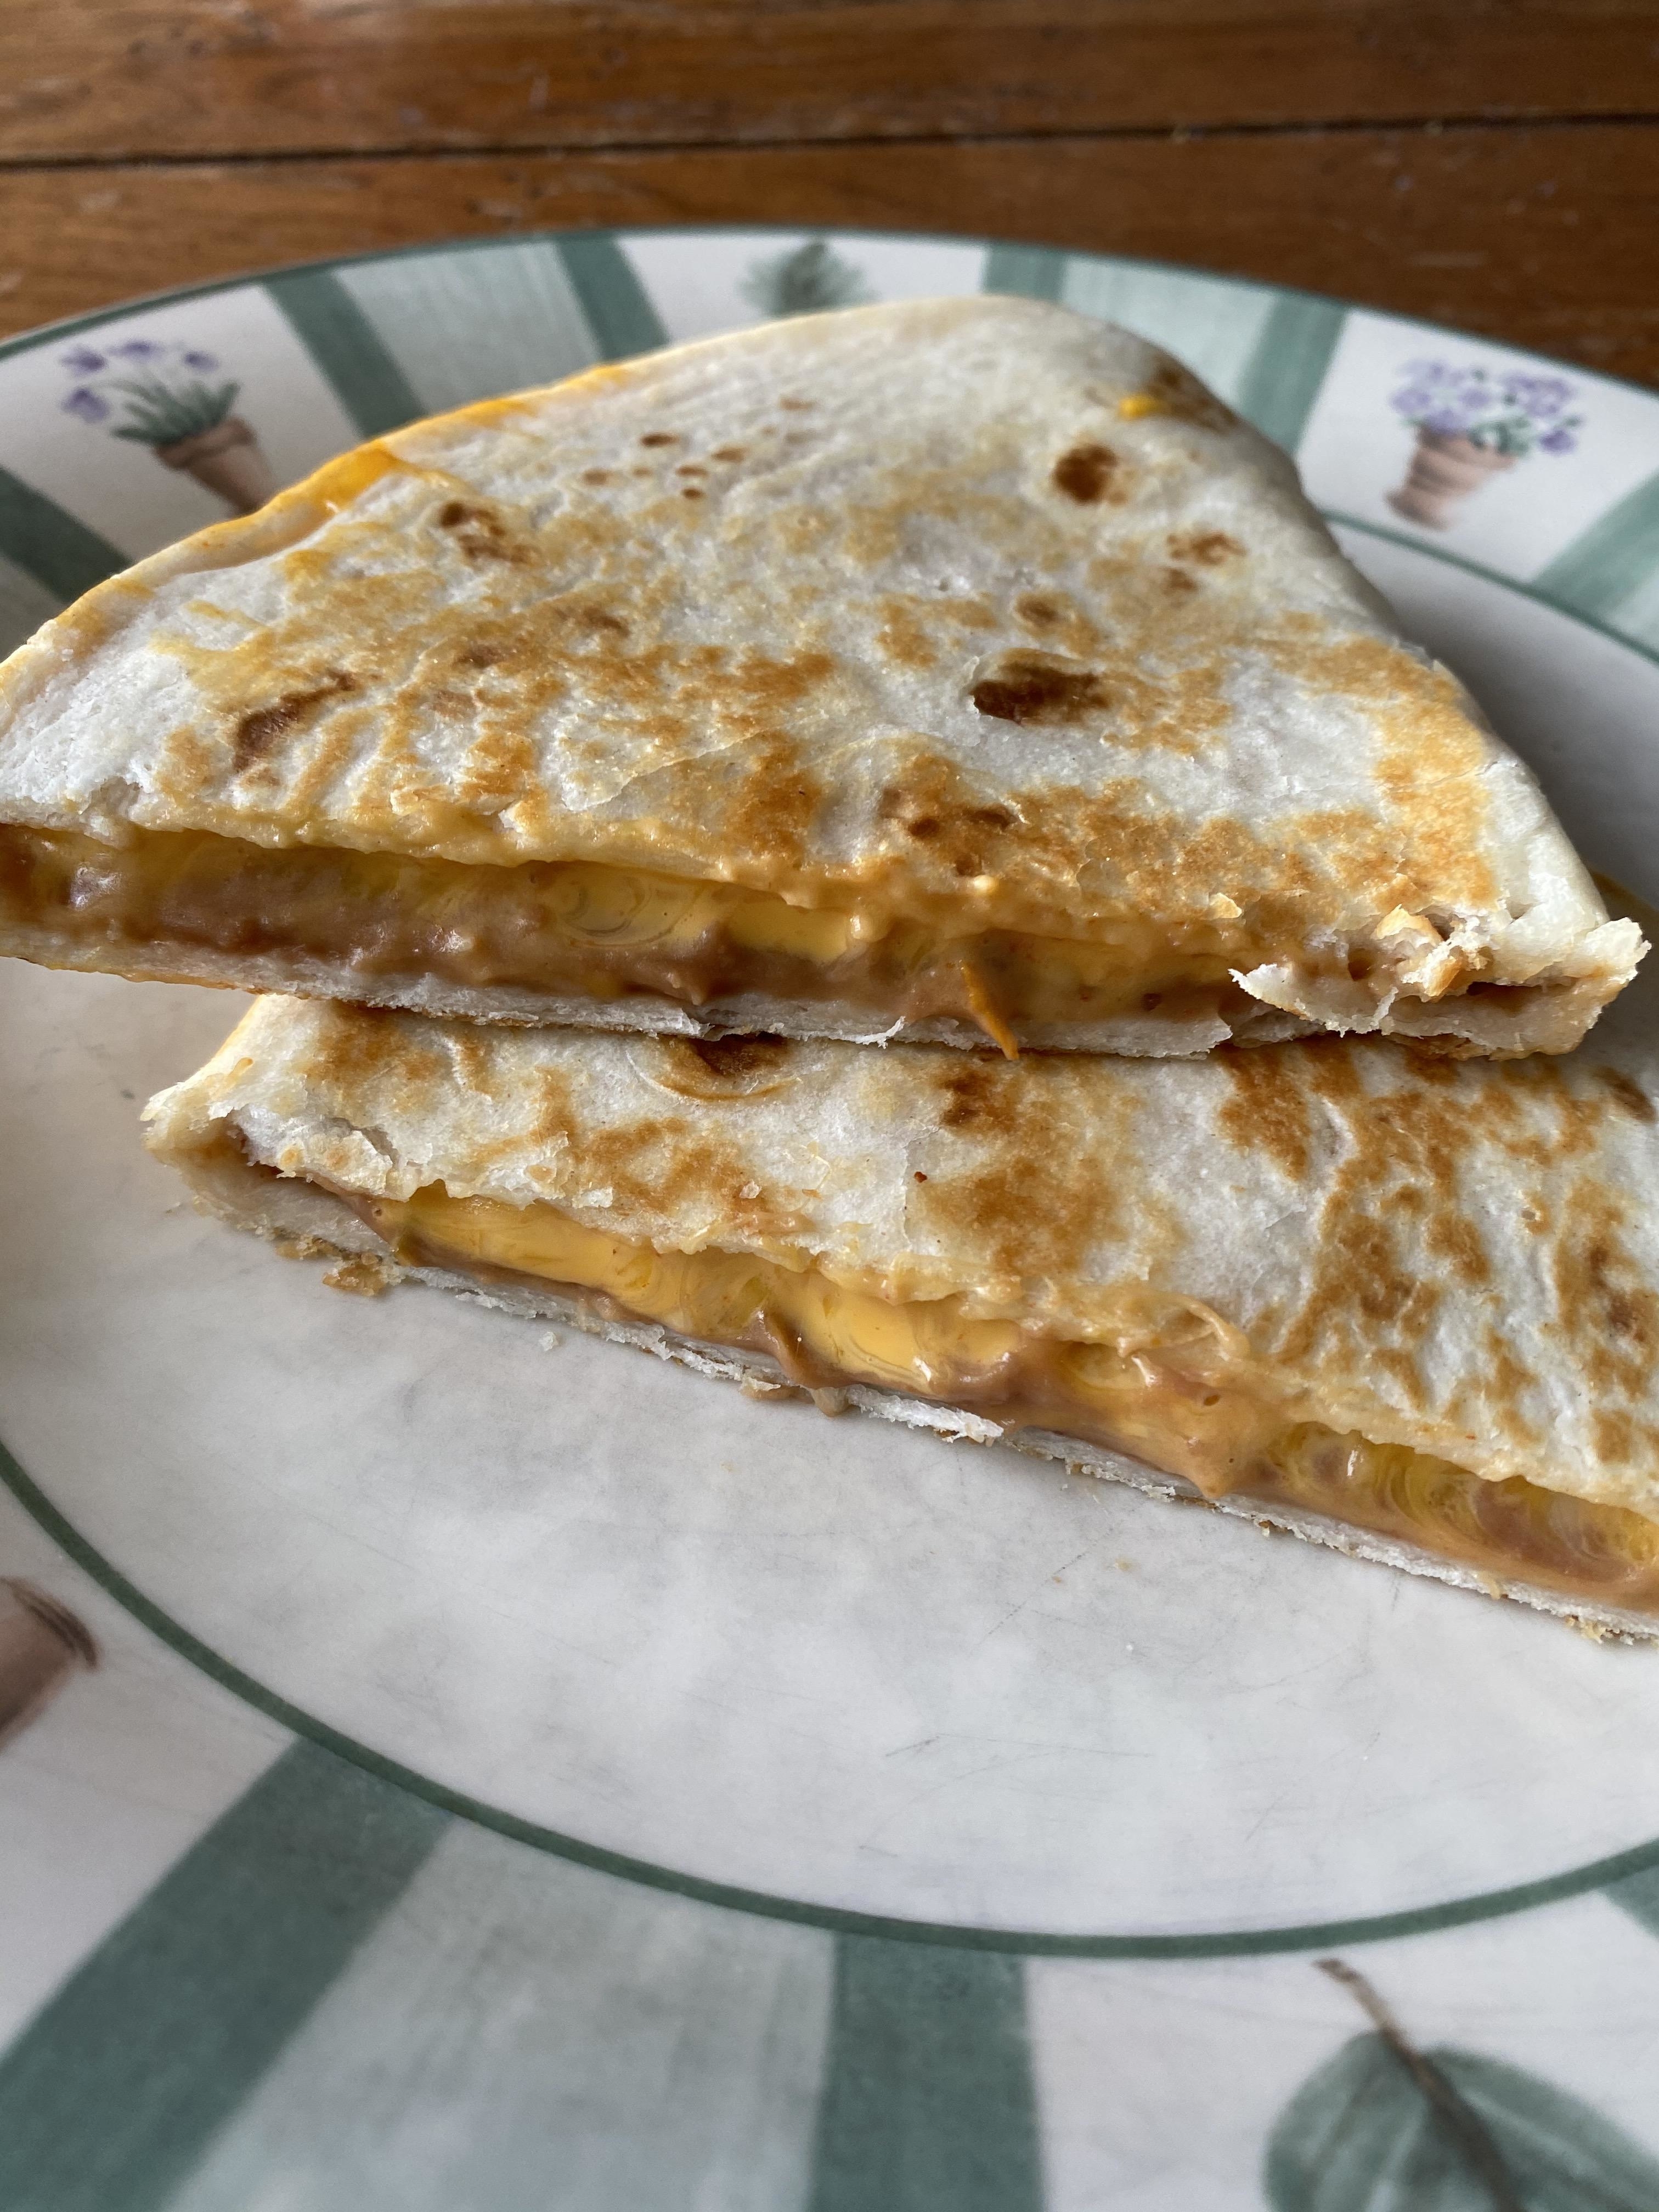 A cheese quesadilla cut into quarters on a plate